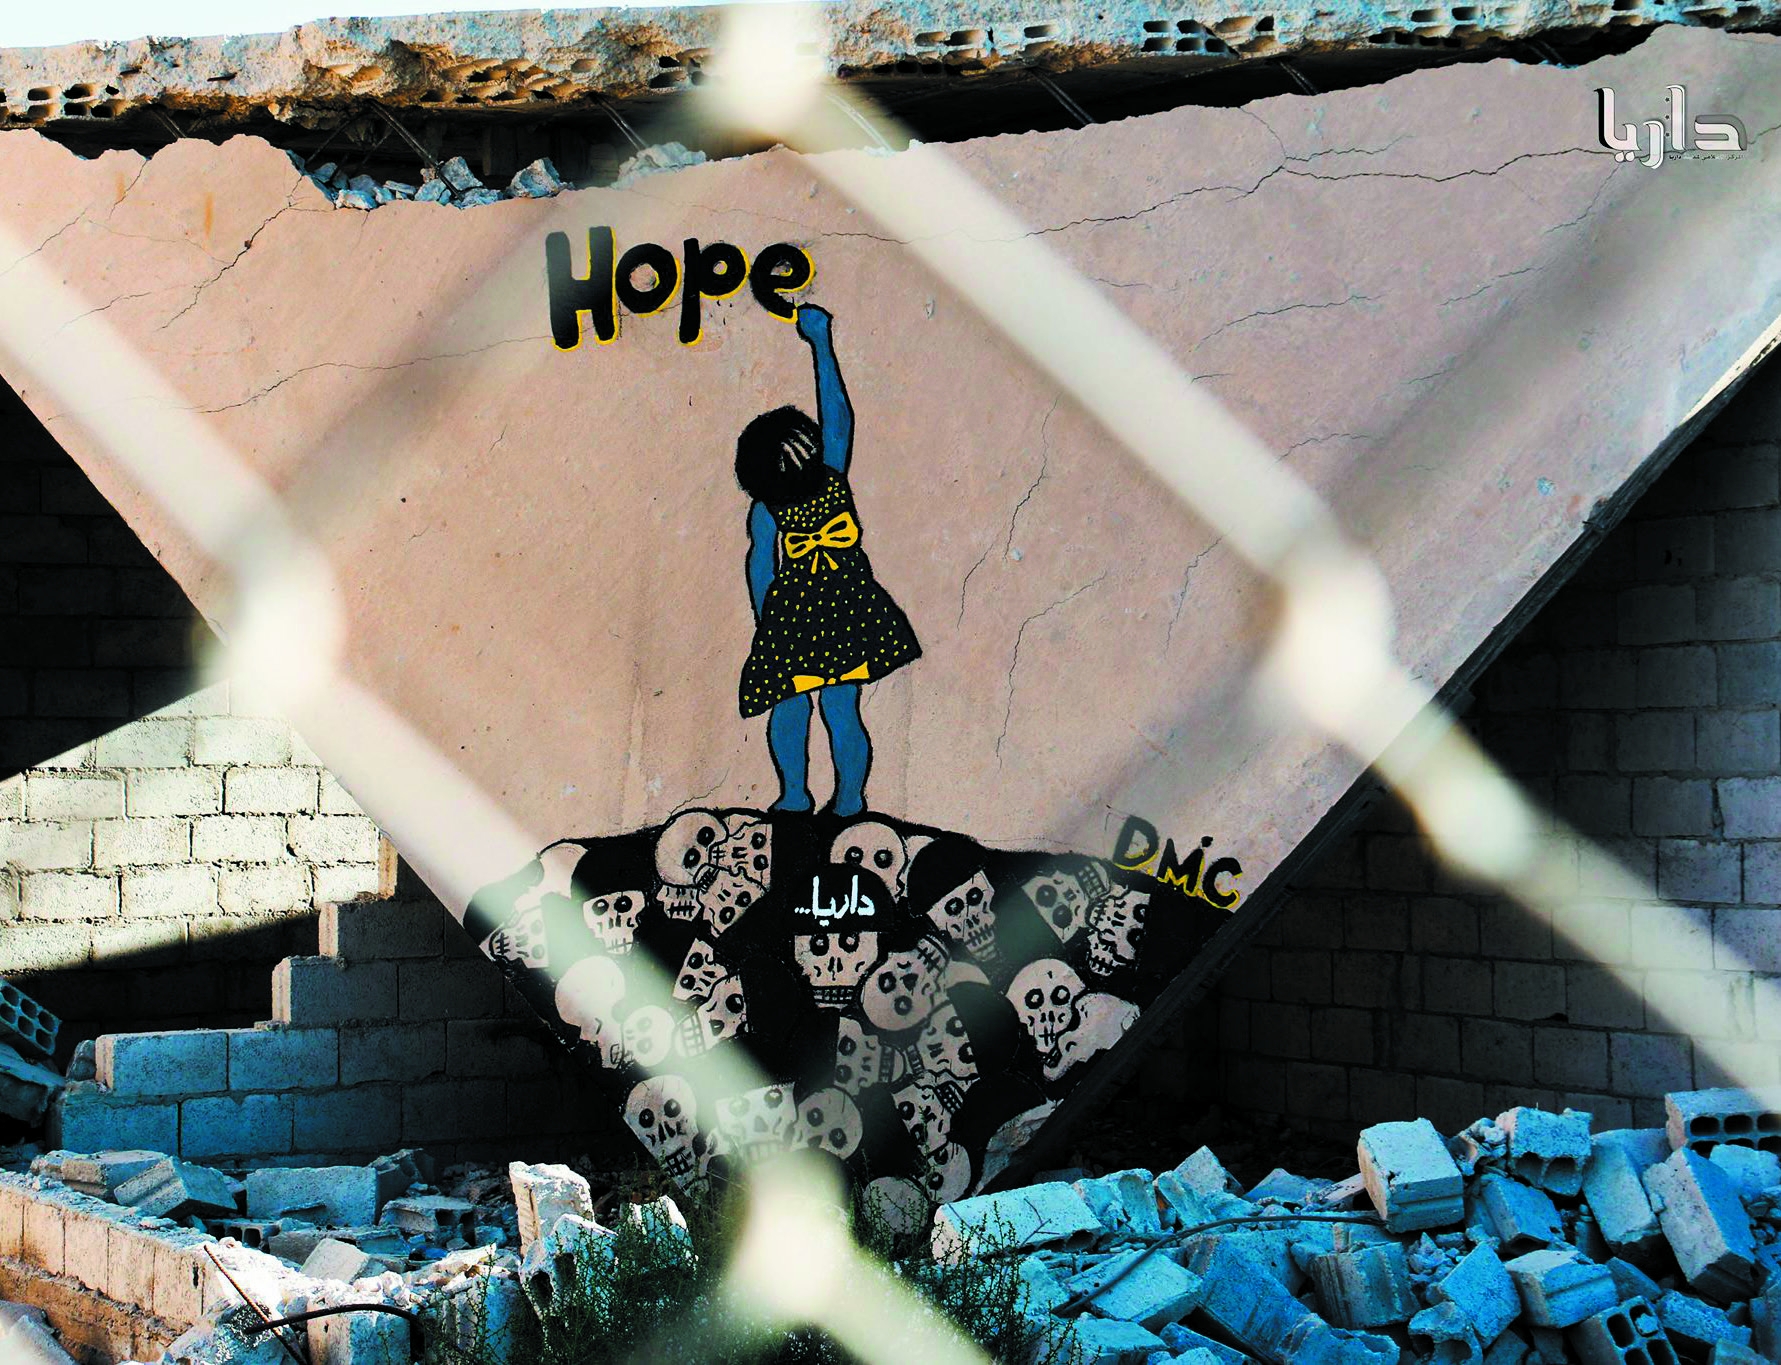 Hope, painted on a wall in Daraya in 2014